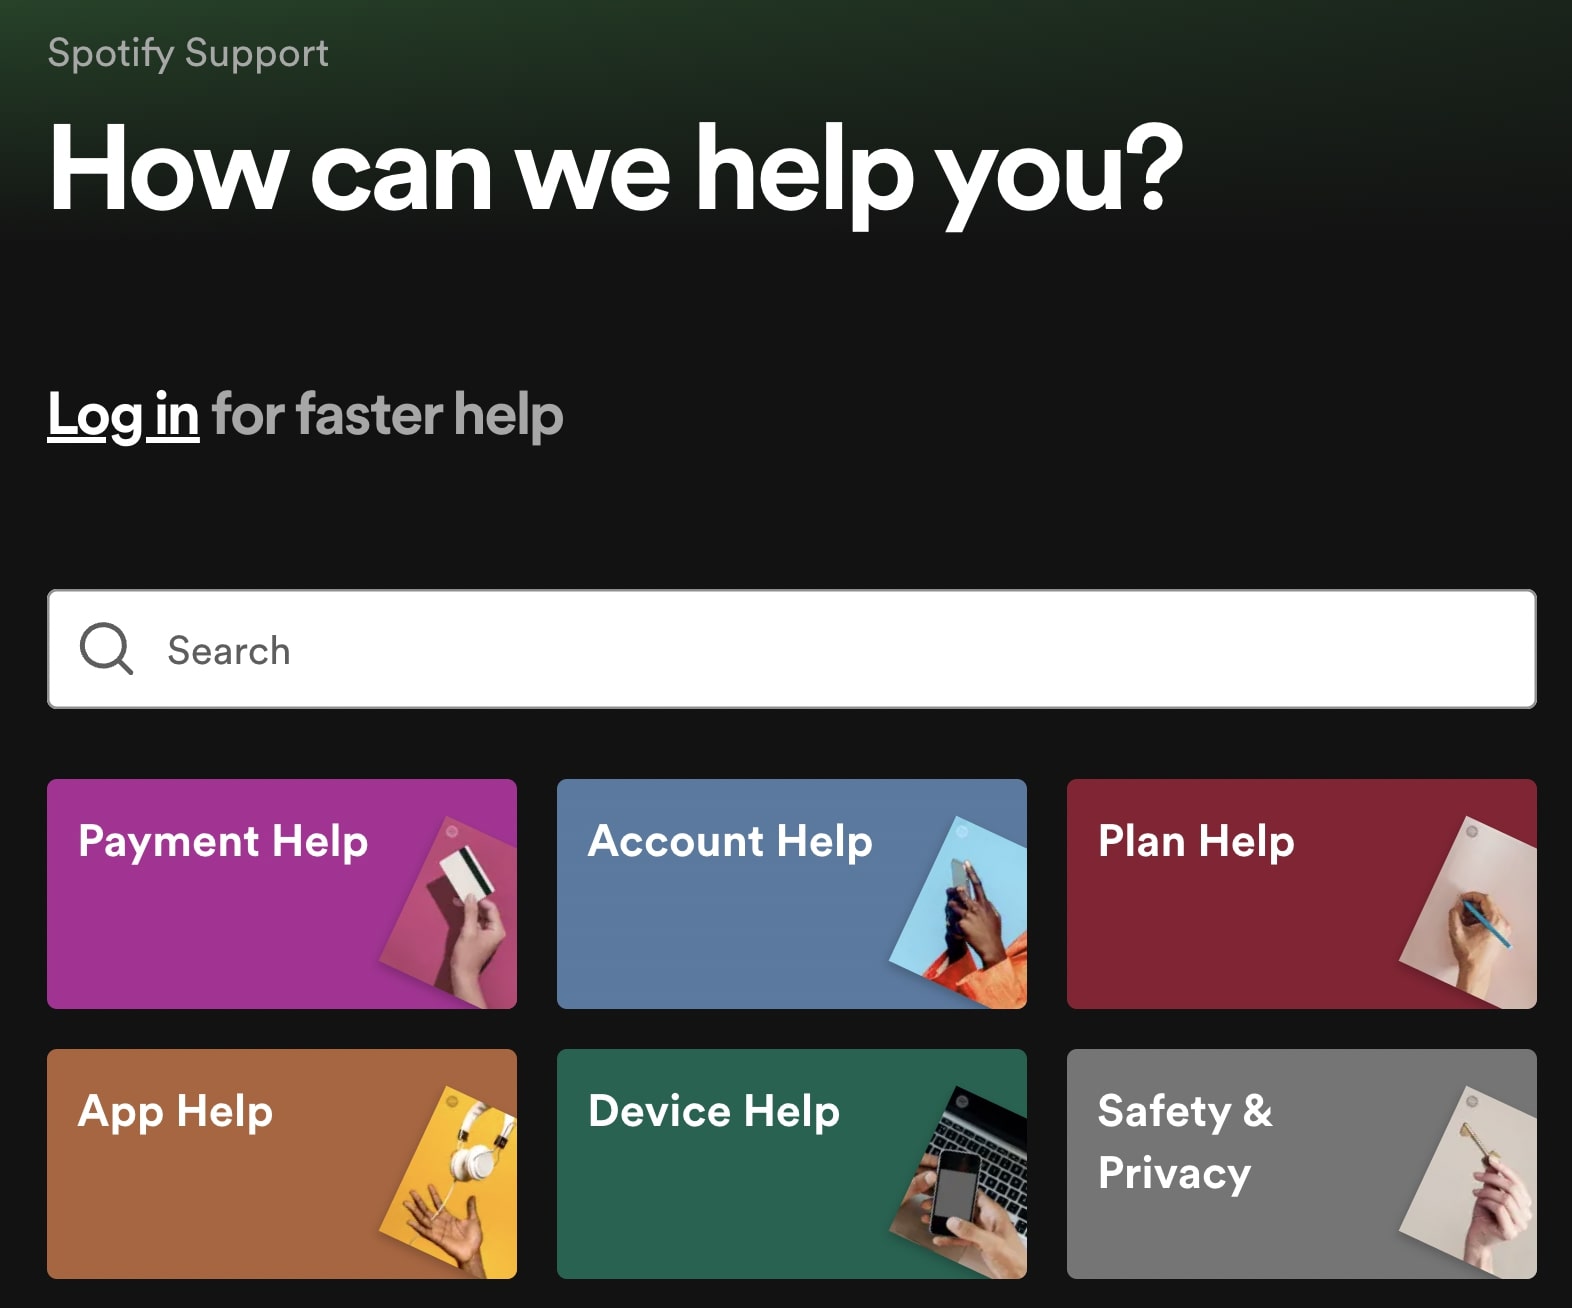 Spotify’s "How can we help you?" FAQ page